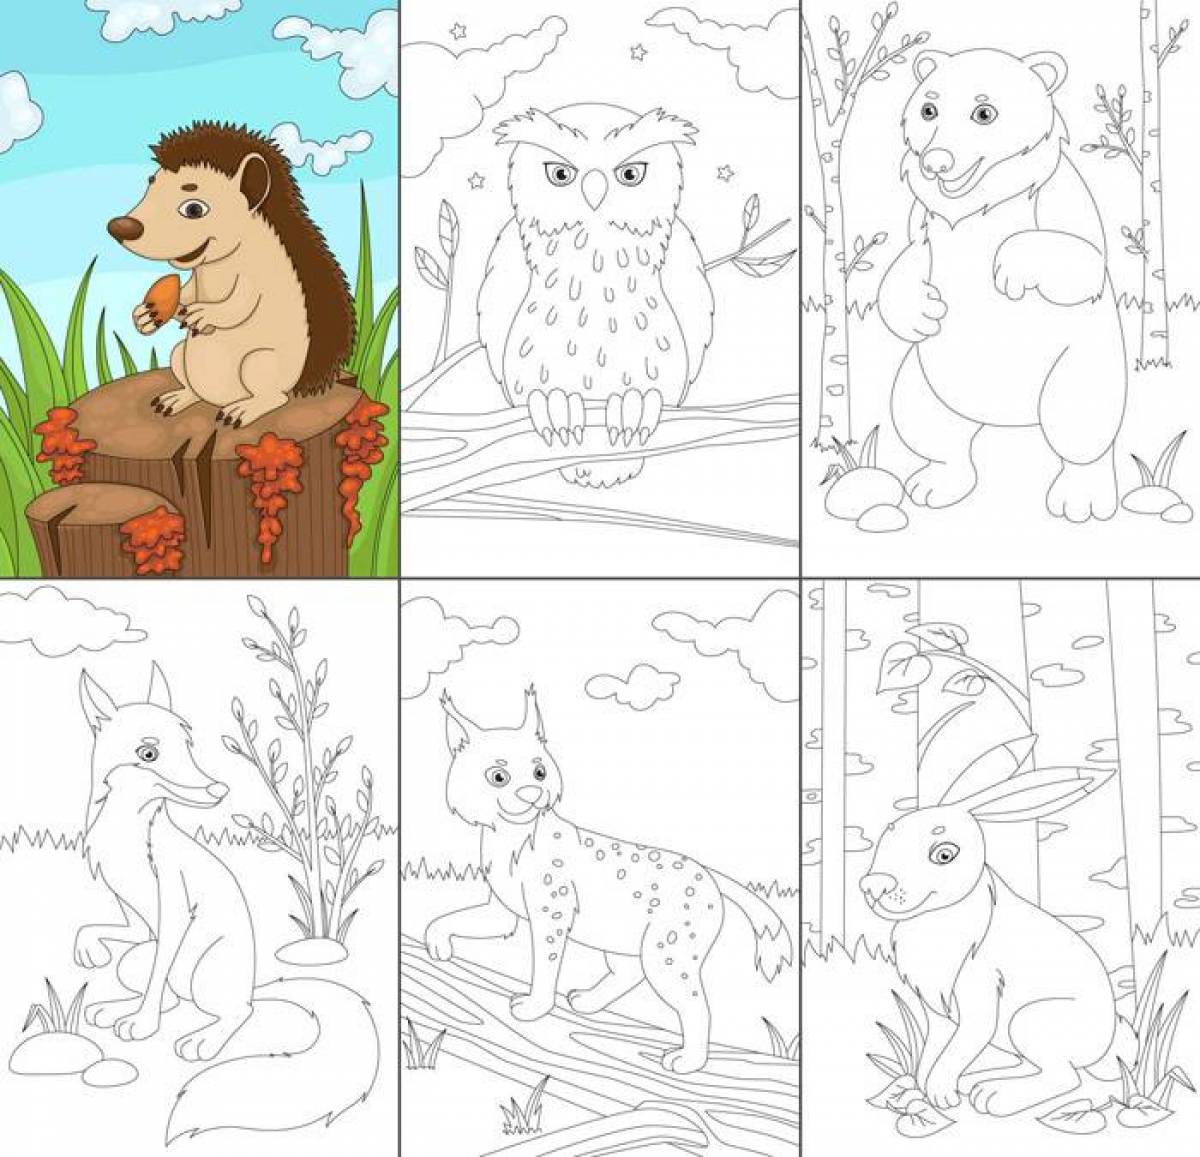 Creative wild animal coloring book for 6-7 year olds